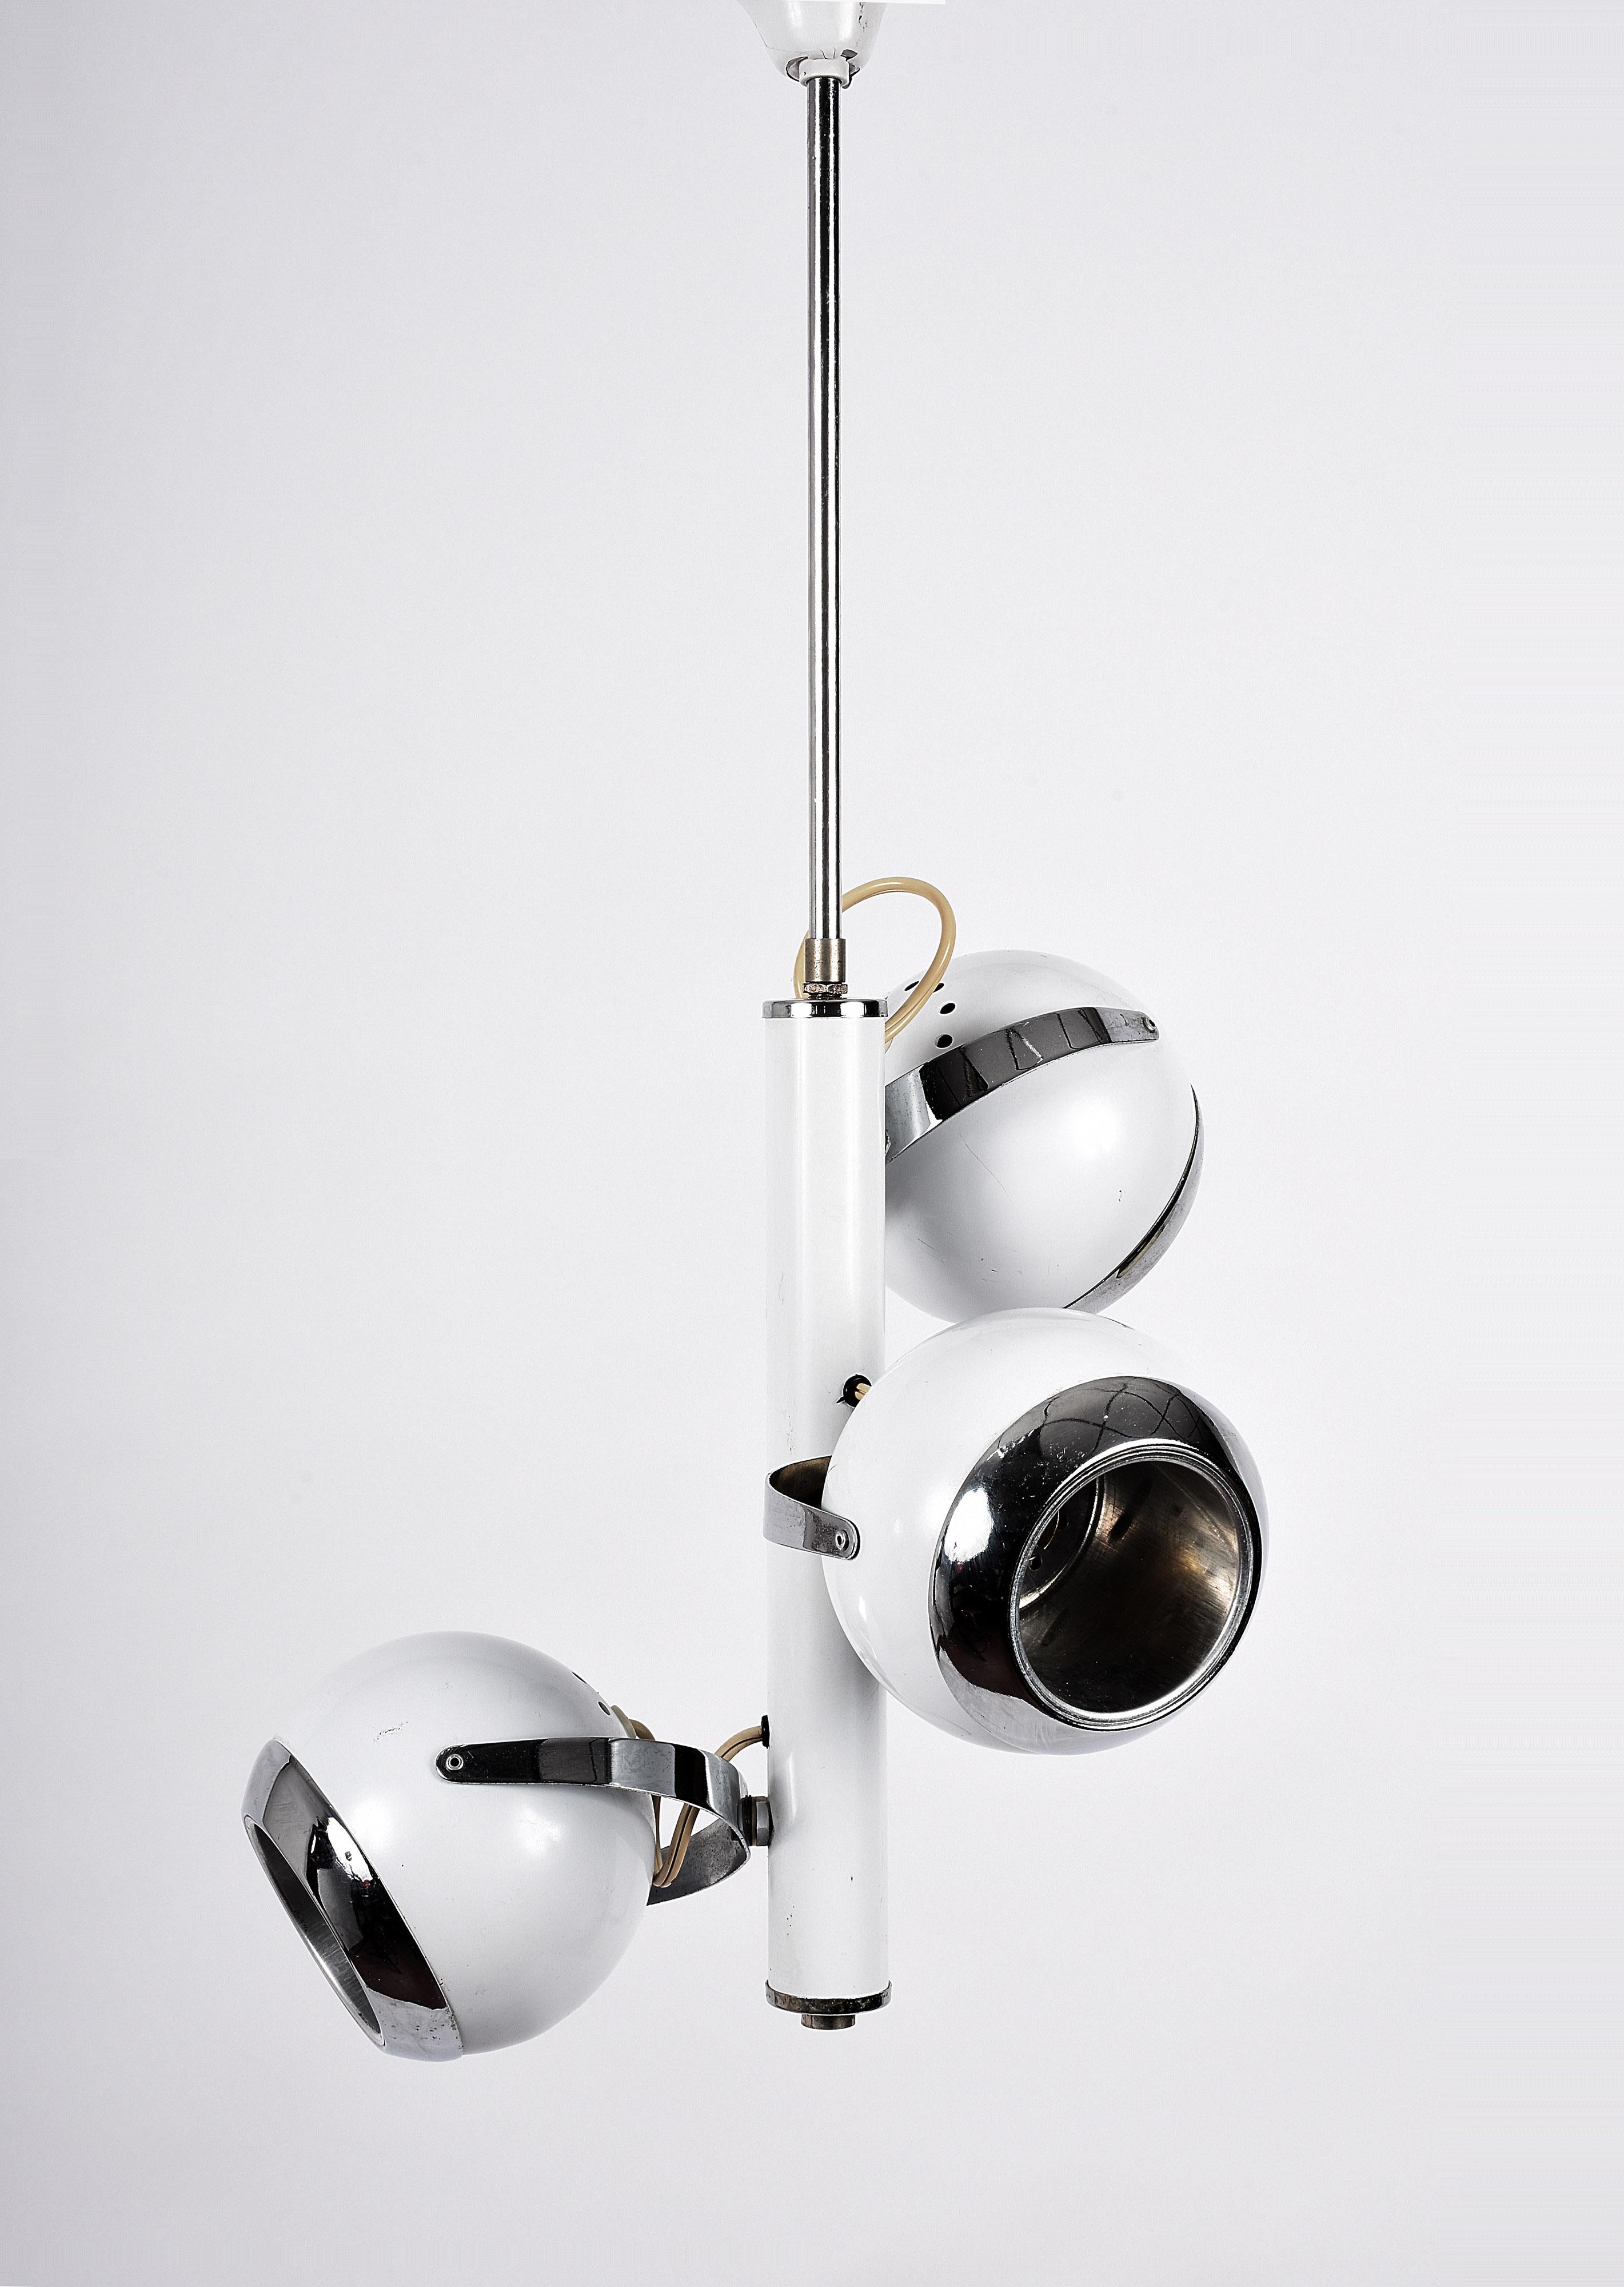 Guzzini Chandelier with Three Adjustable Lights White and Chrome, Italy, 1970s For Sale 3